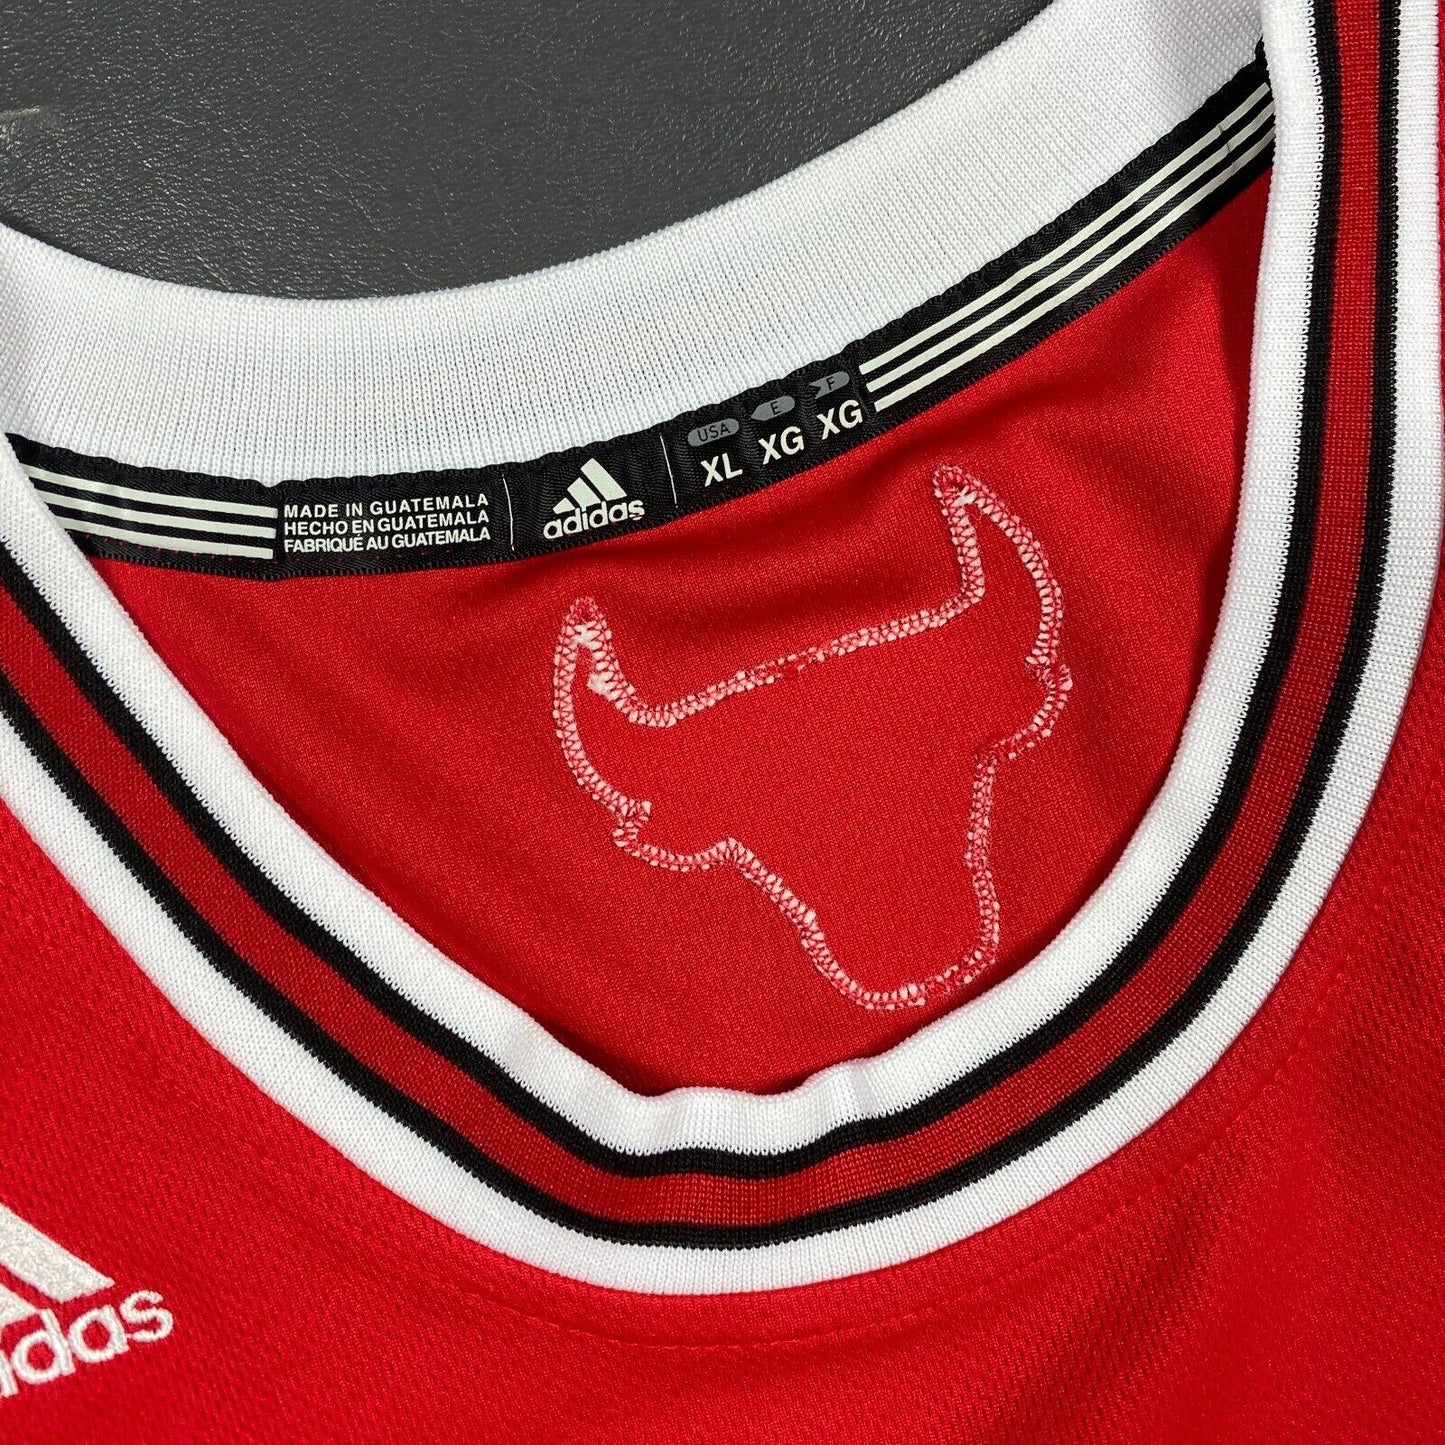 100% Authentic Derrick Rose Adidas Chicago Bulls Jersey Size Size XL+2" Mens